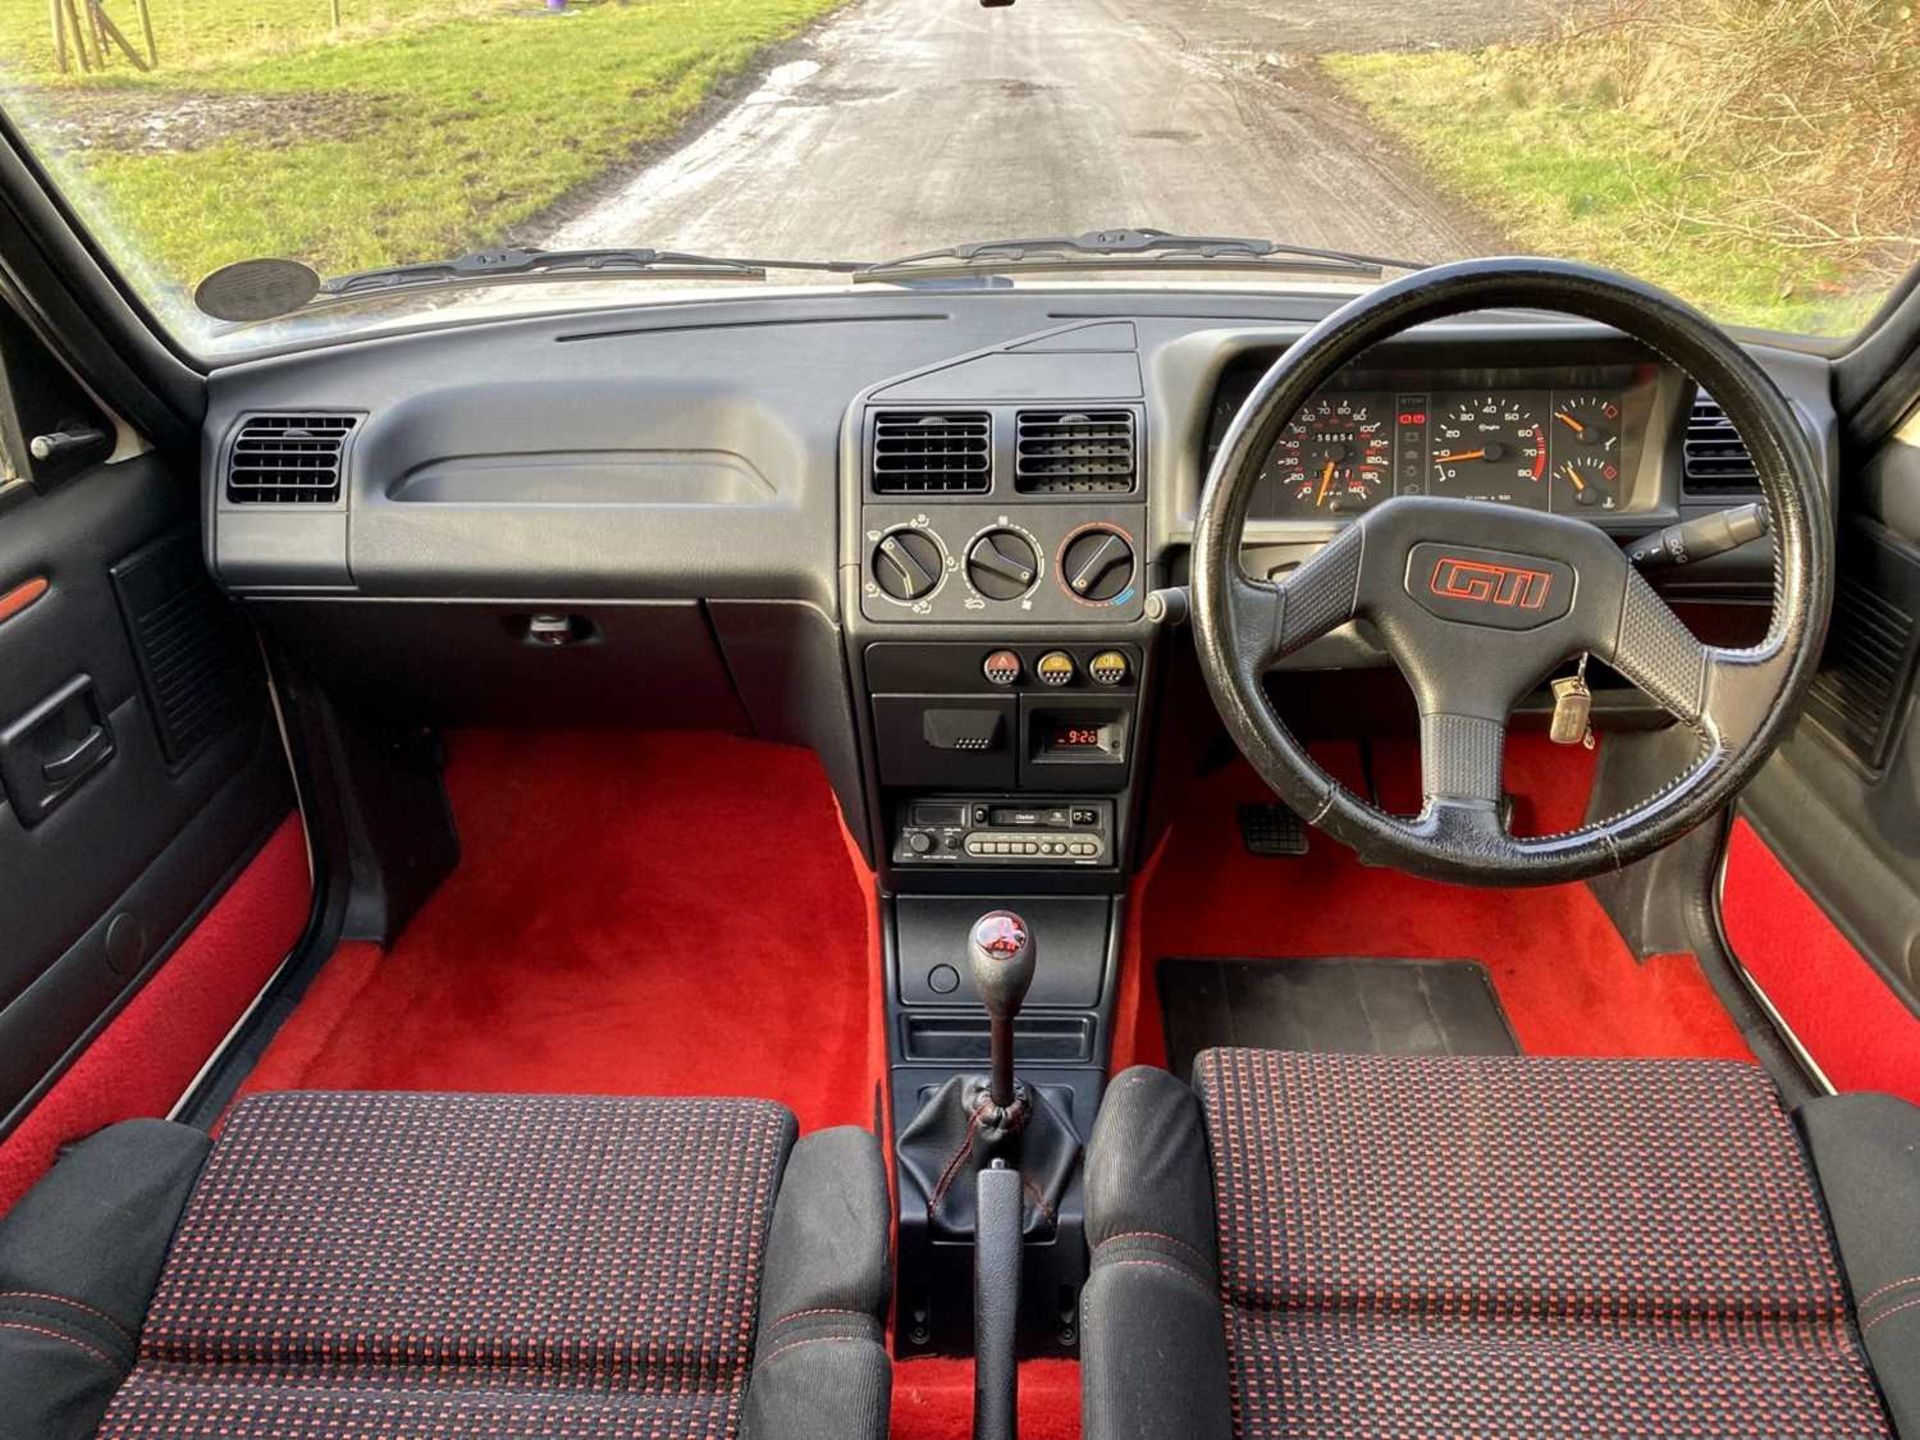 1990 Peugeot 205 GTi 1.6 Only 56,000 miles, same owner for 16 years - Image 36 of 81